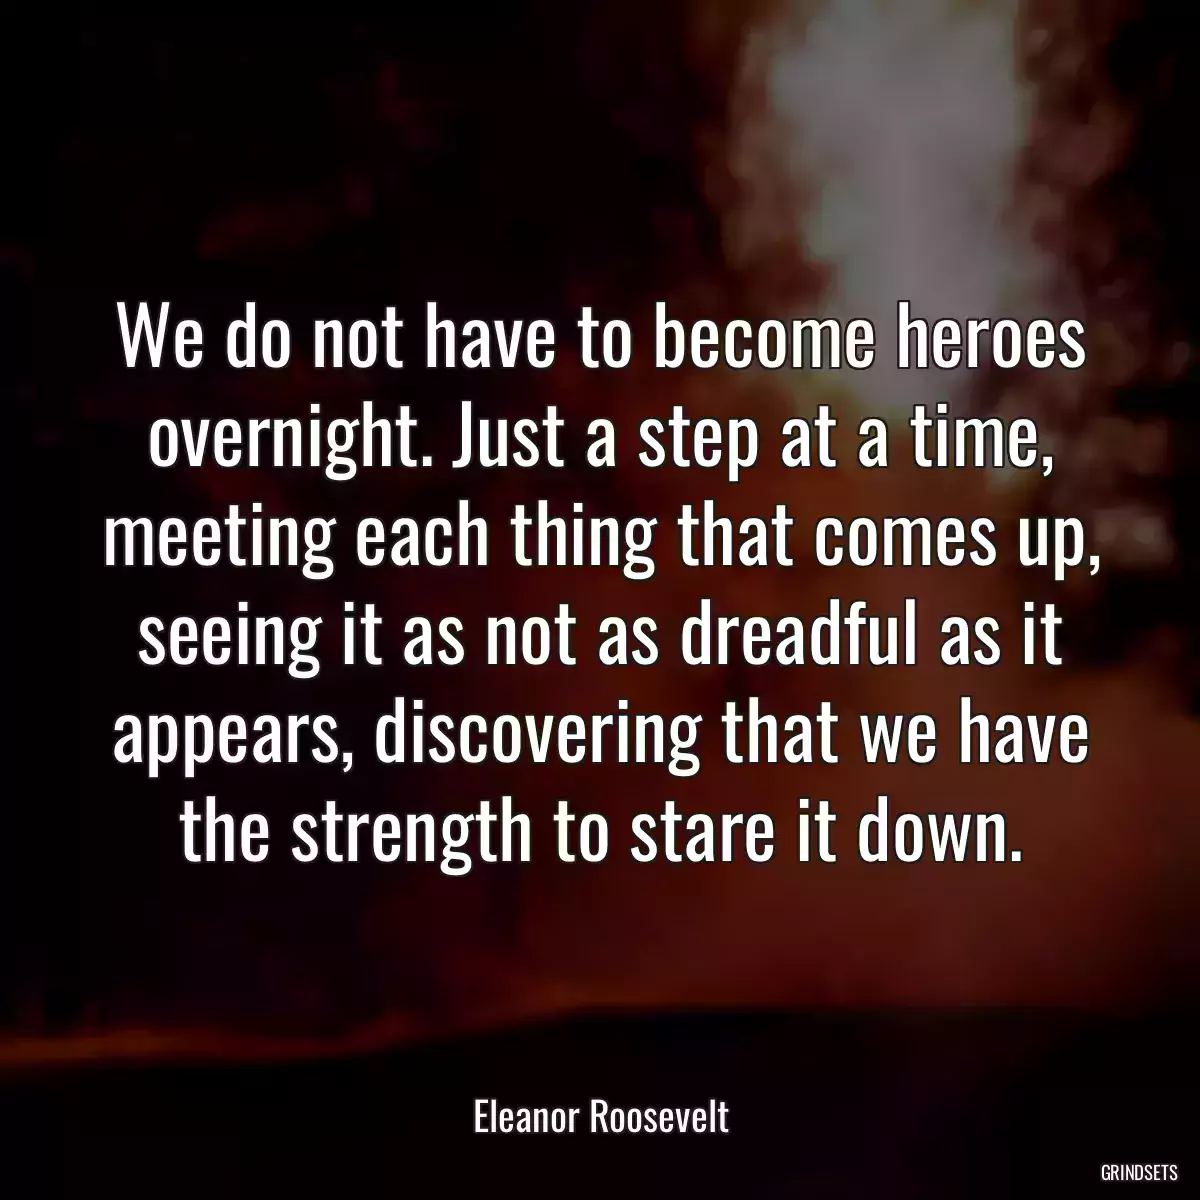 We do not have to become heroes overnight. Just a step at a time, meeting each thing that comes up, seeing it as not as dreadful as it appears, discovering that we have the strength to stare it down.